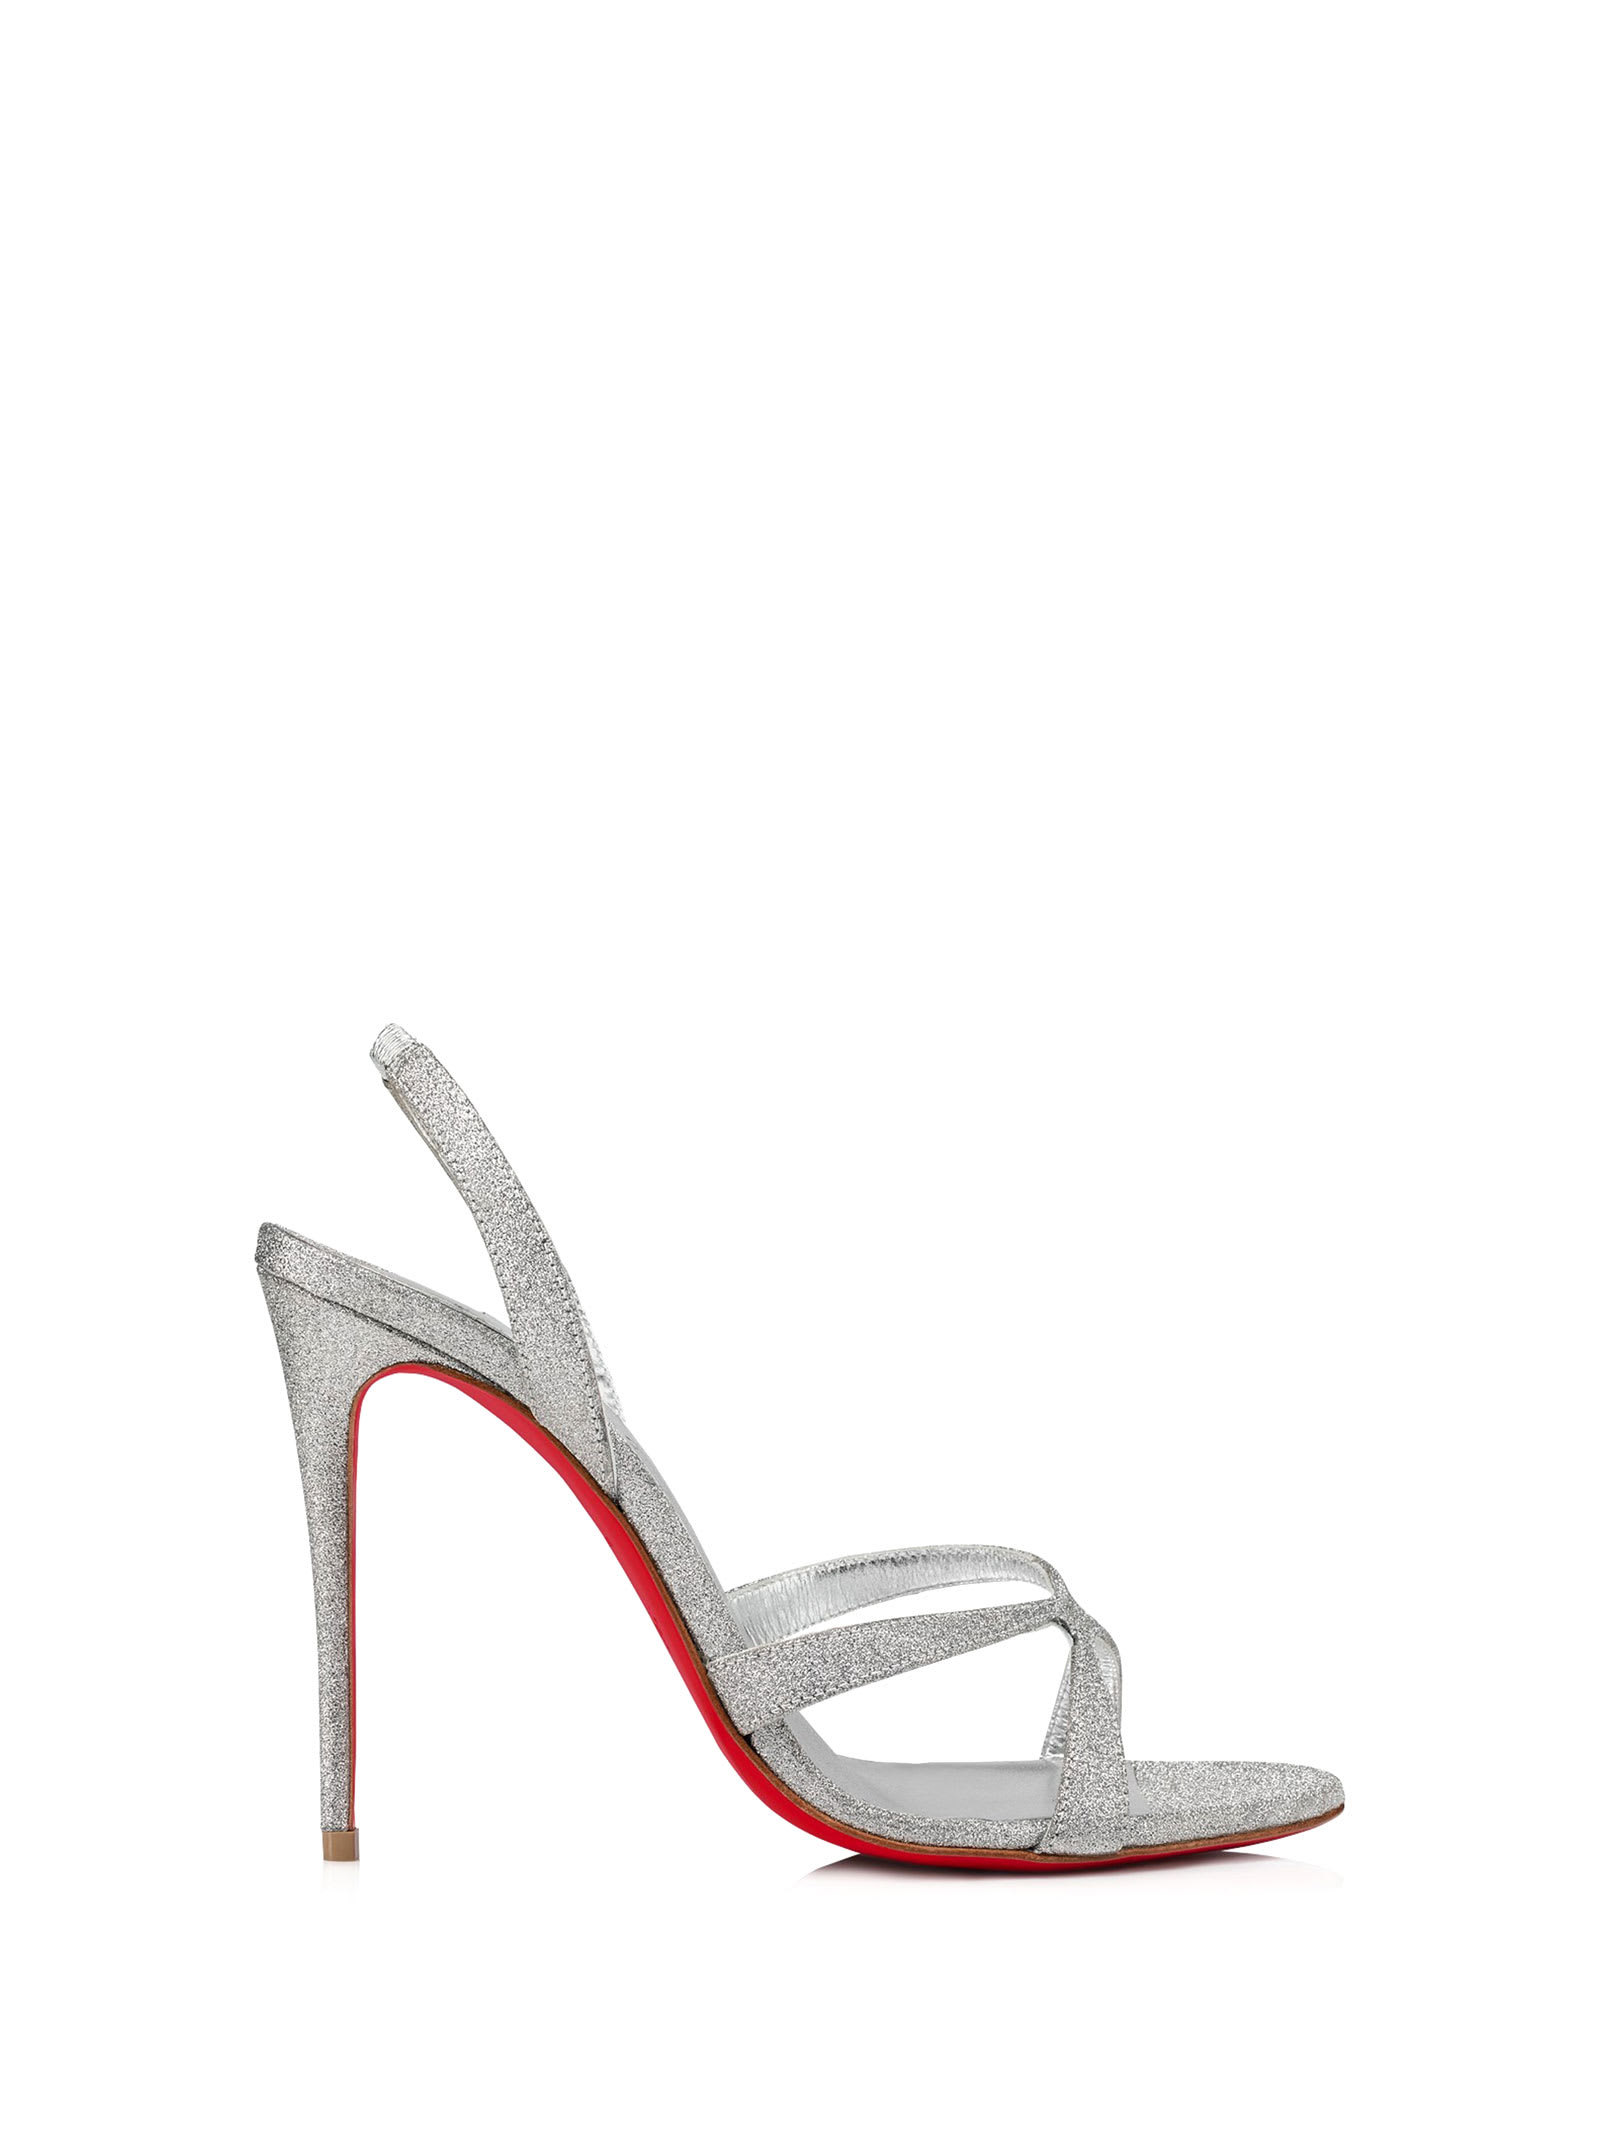 Christian Louboutin Emilie Sandals In Glittery Leather